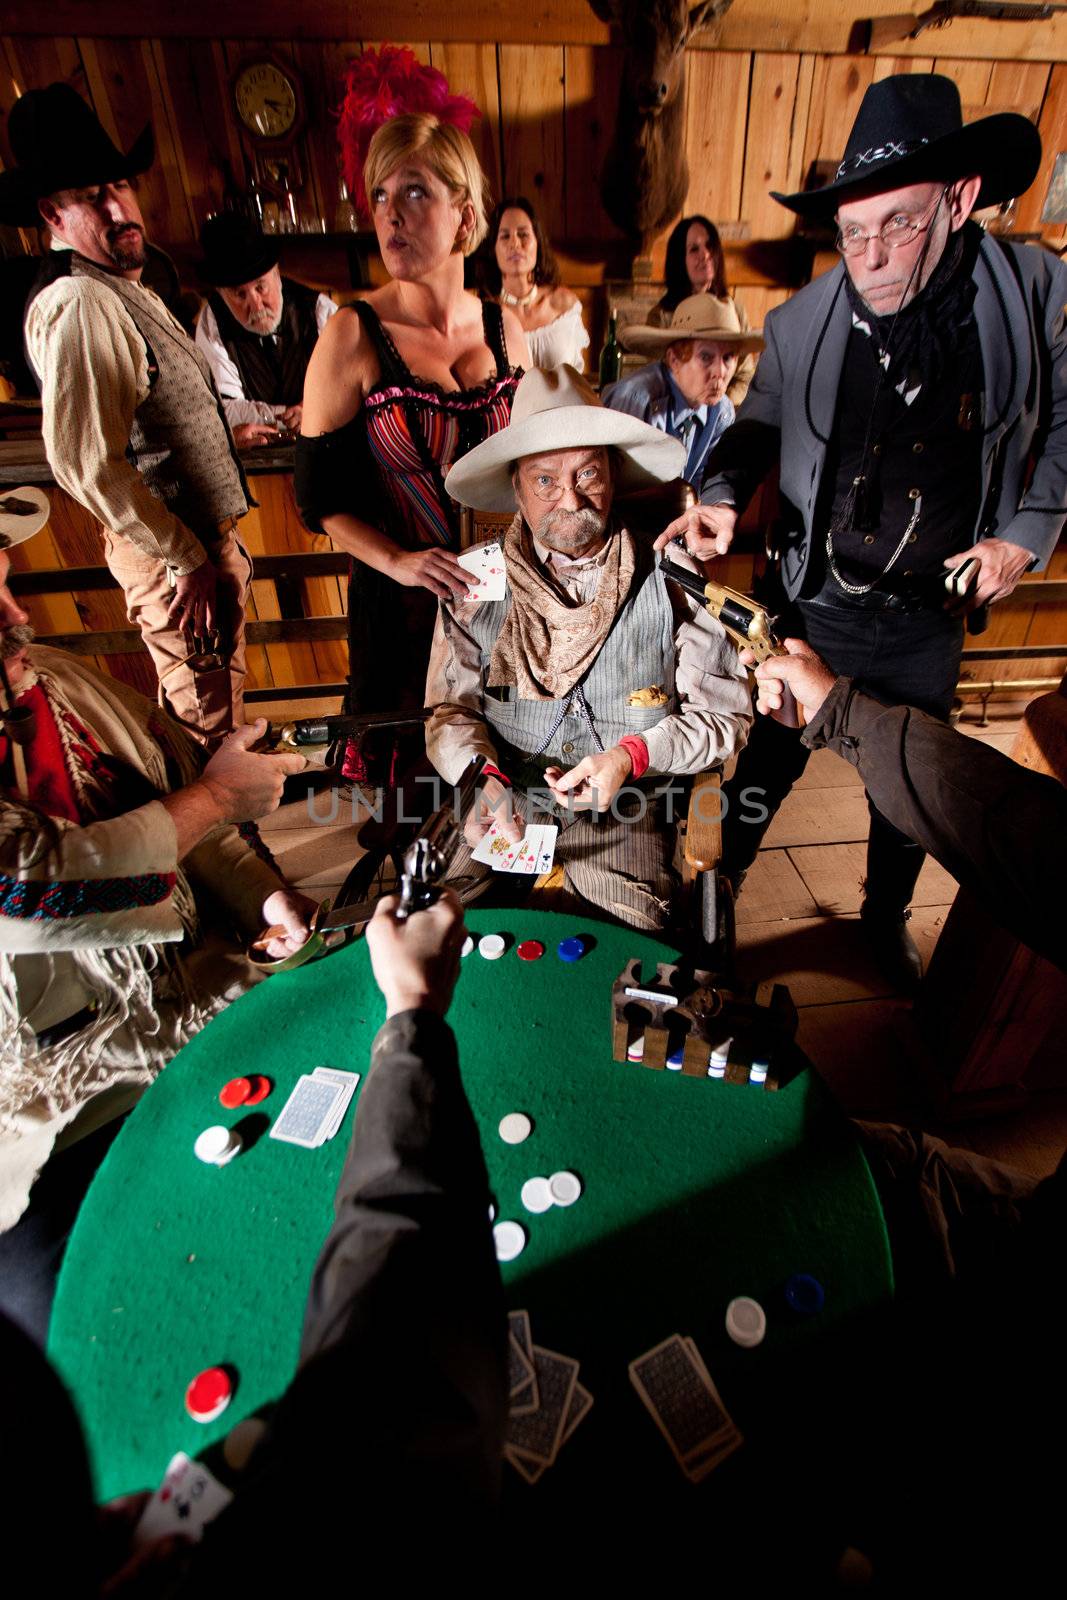 An old western cowboy is caught cheating at cards by the entire saloon.